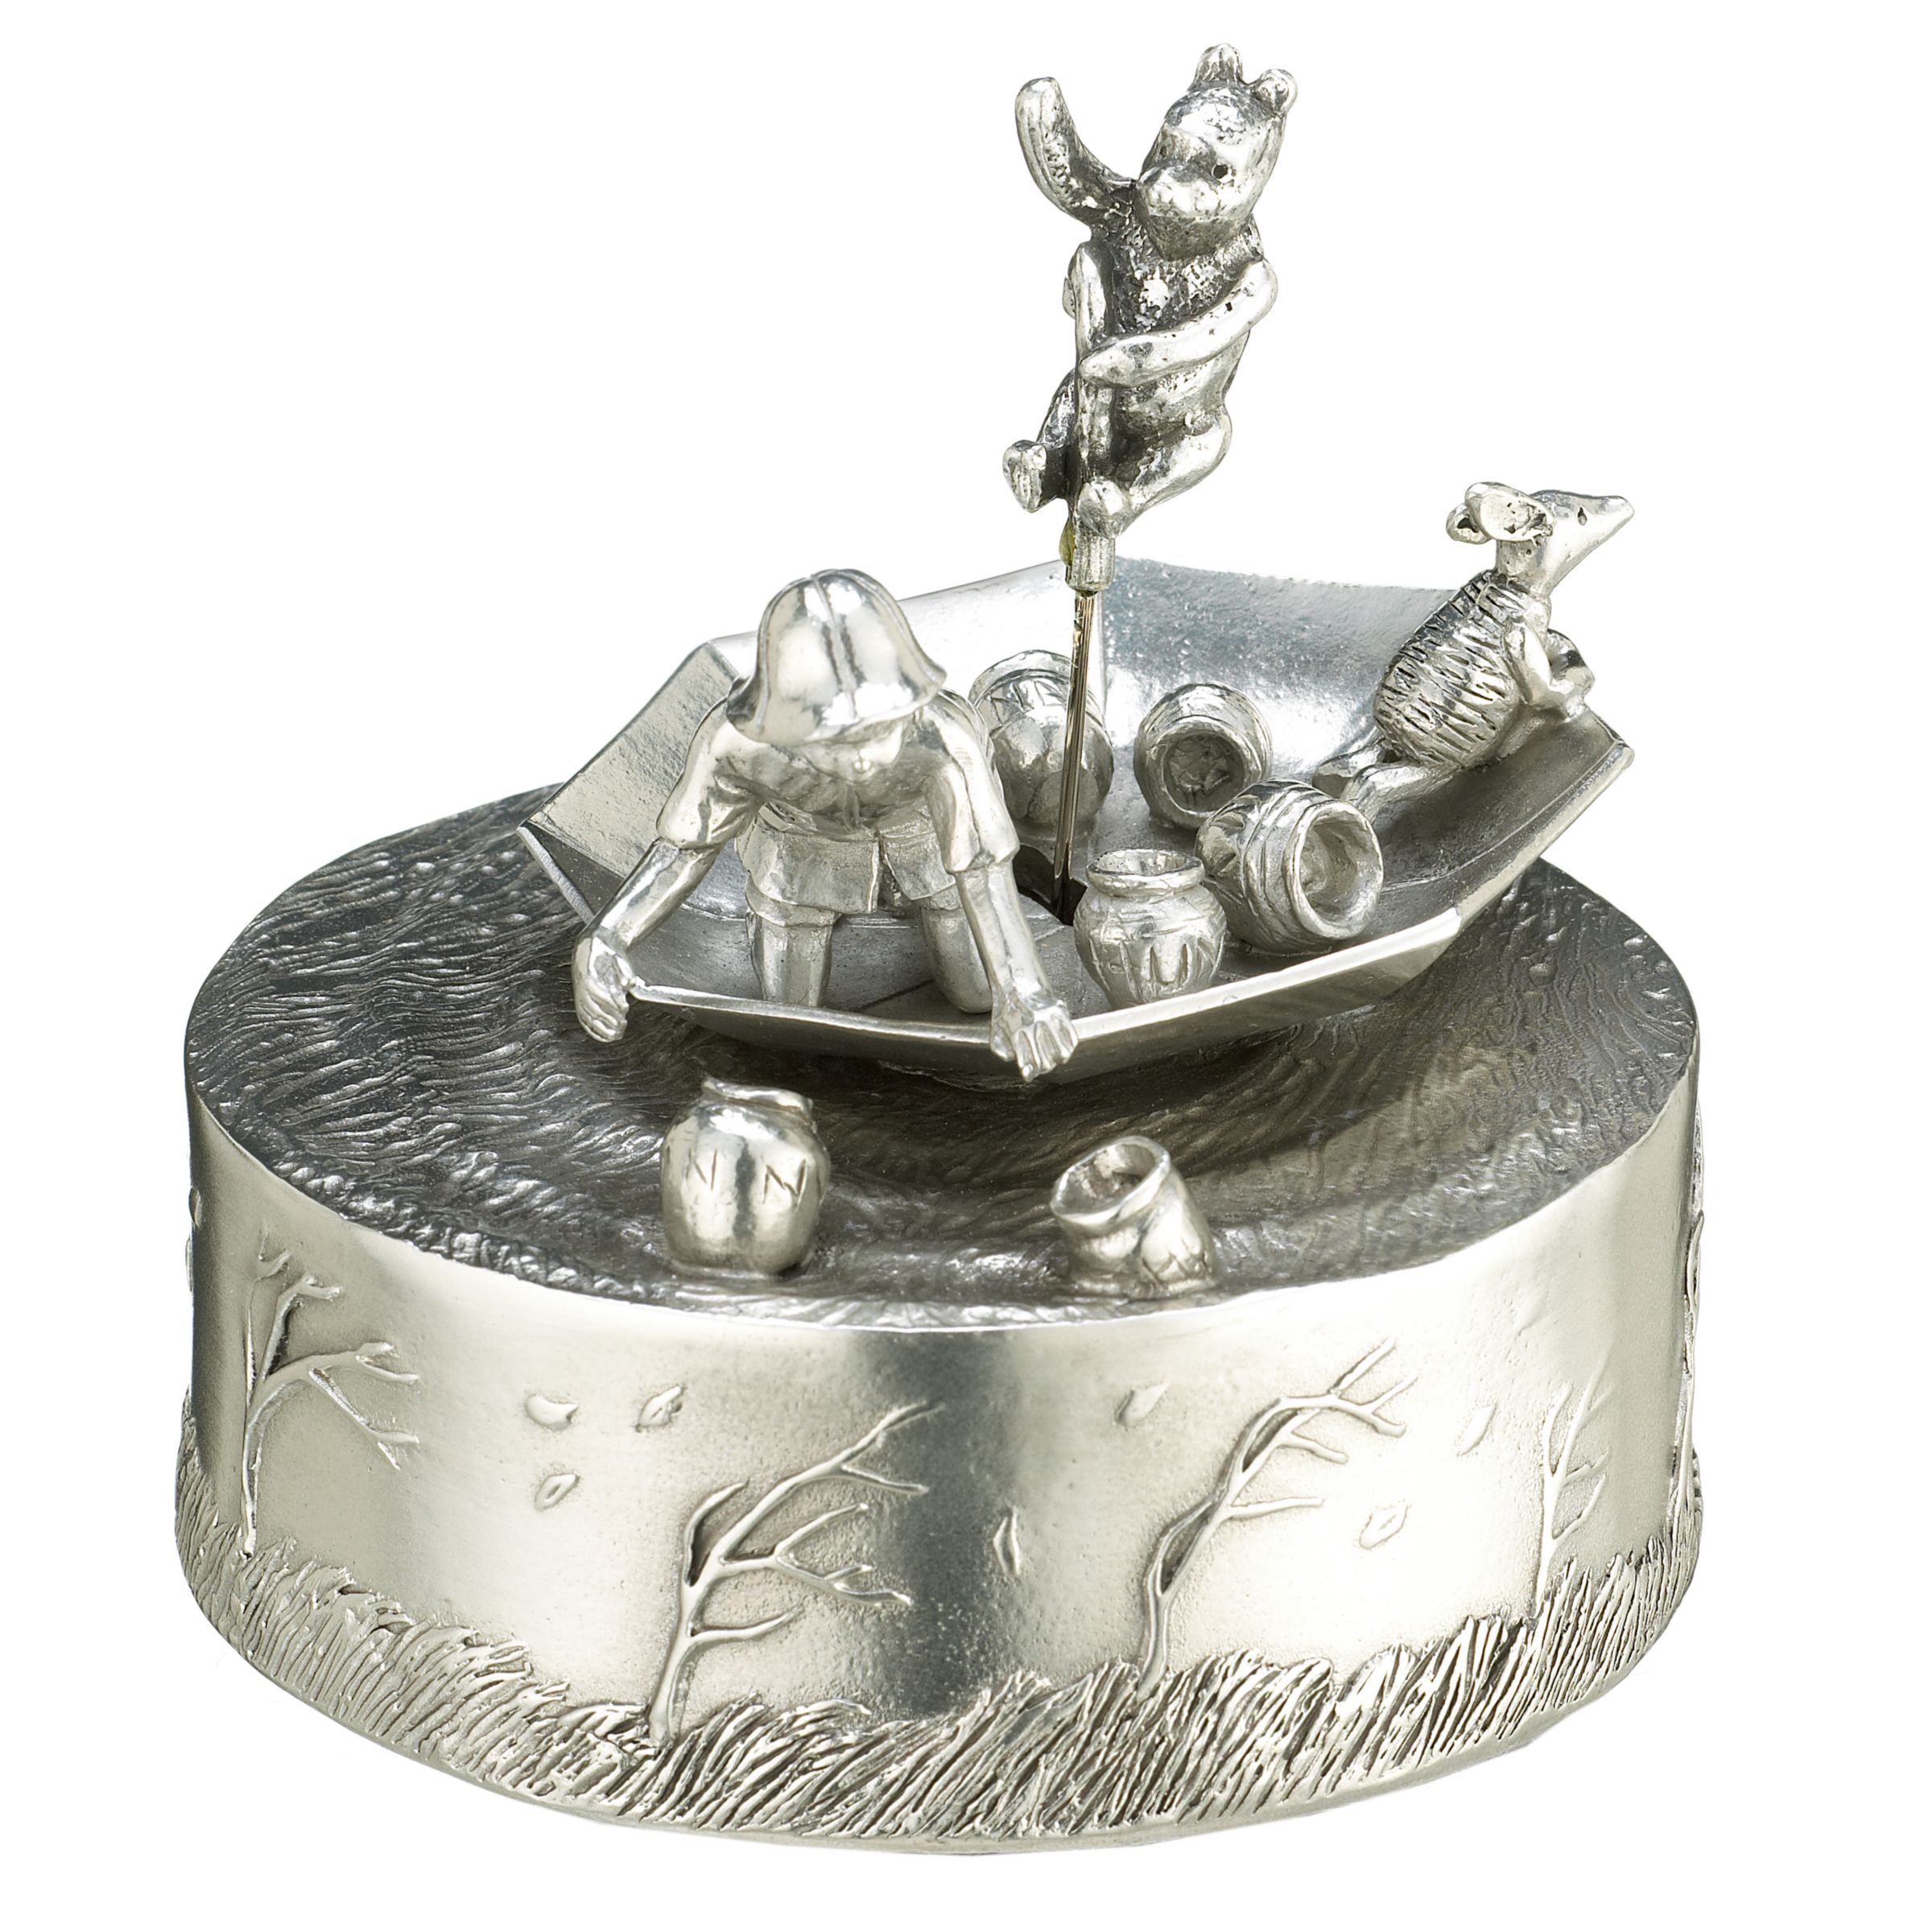 Blustery Day Musical Pewter